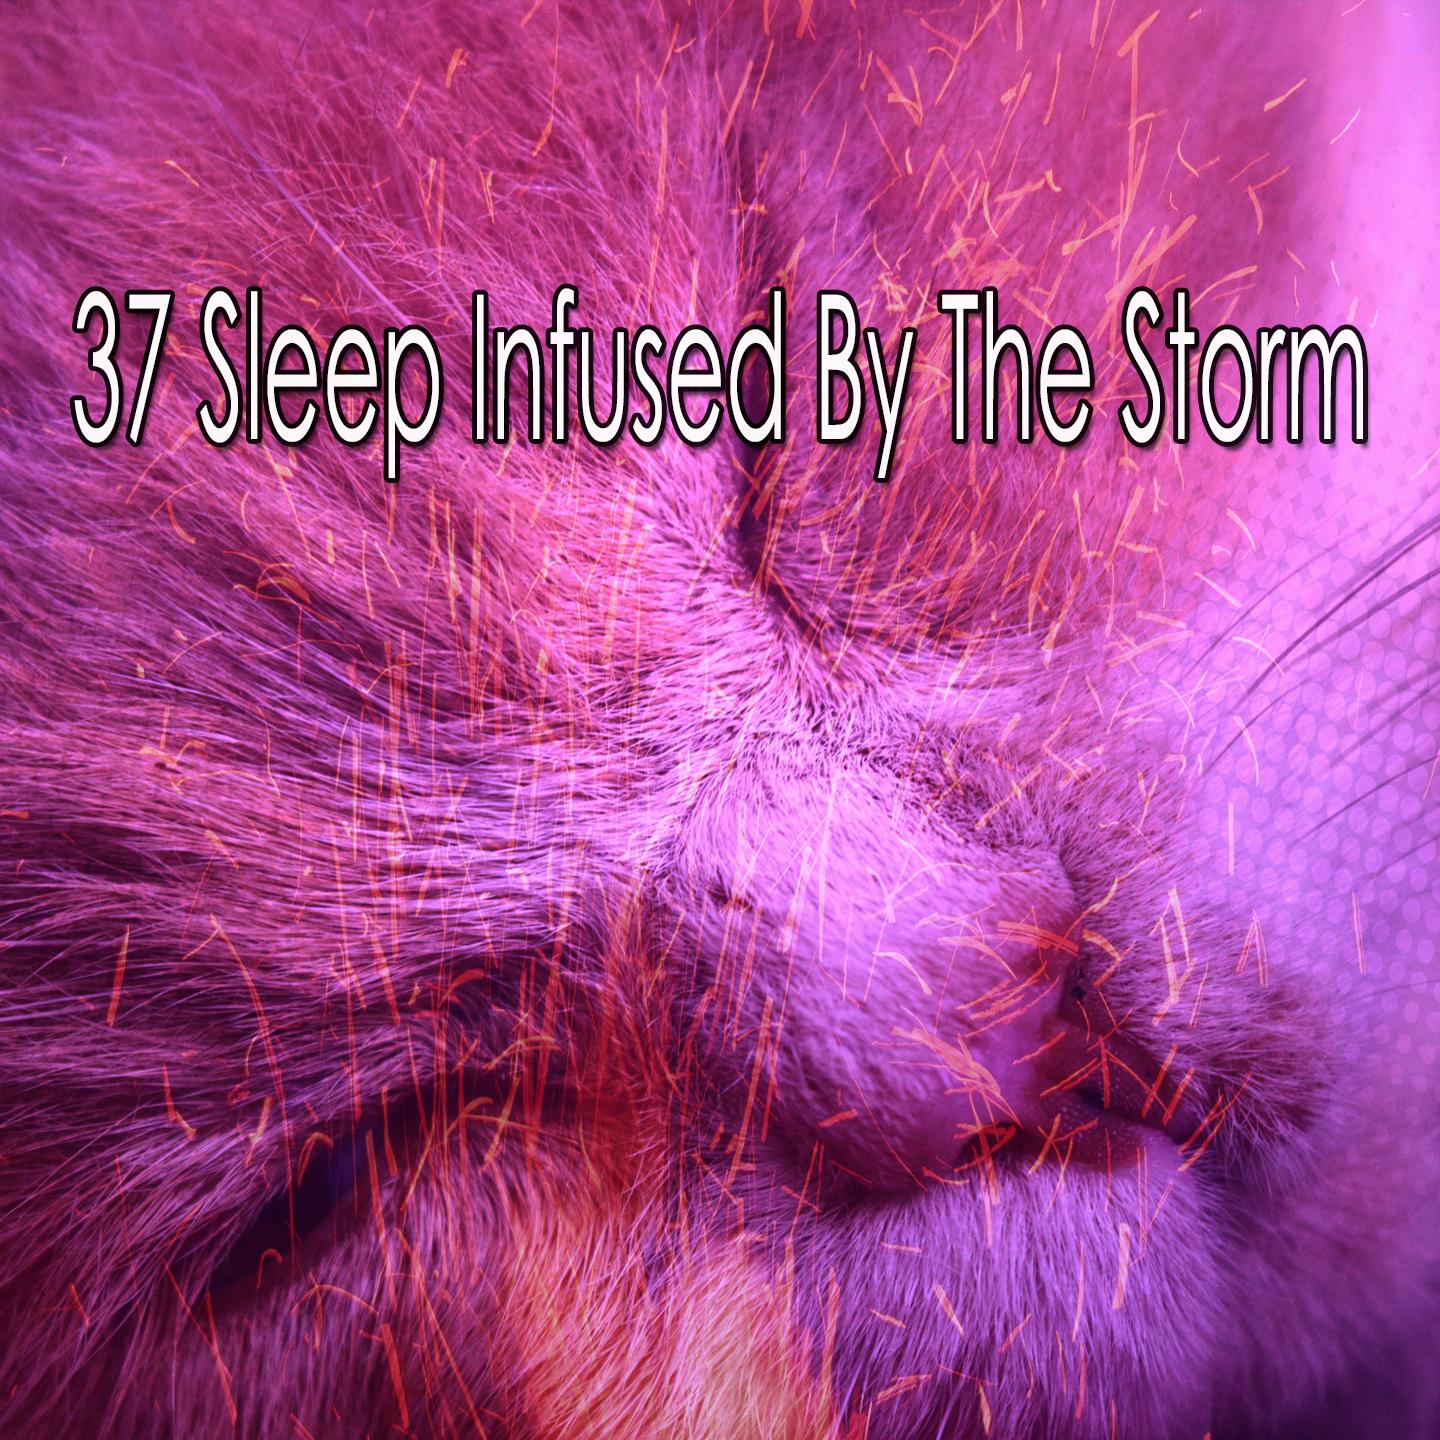 37 Sleep Infused by the Storm